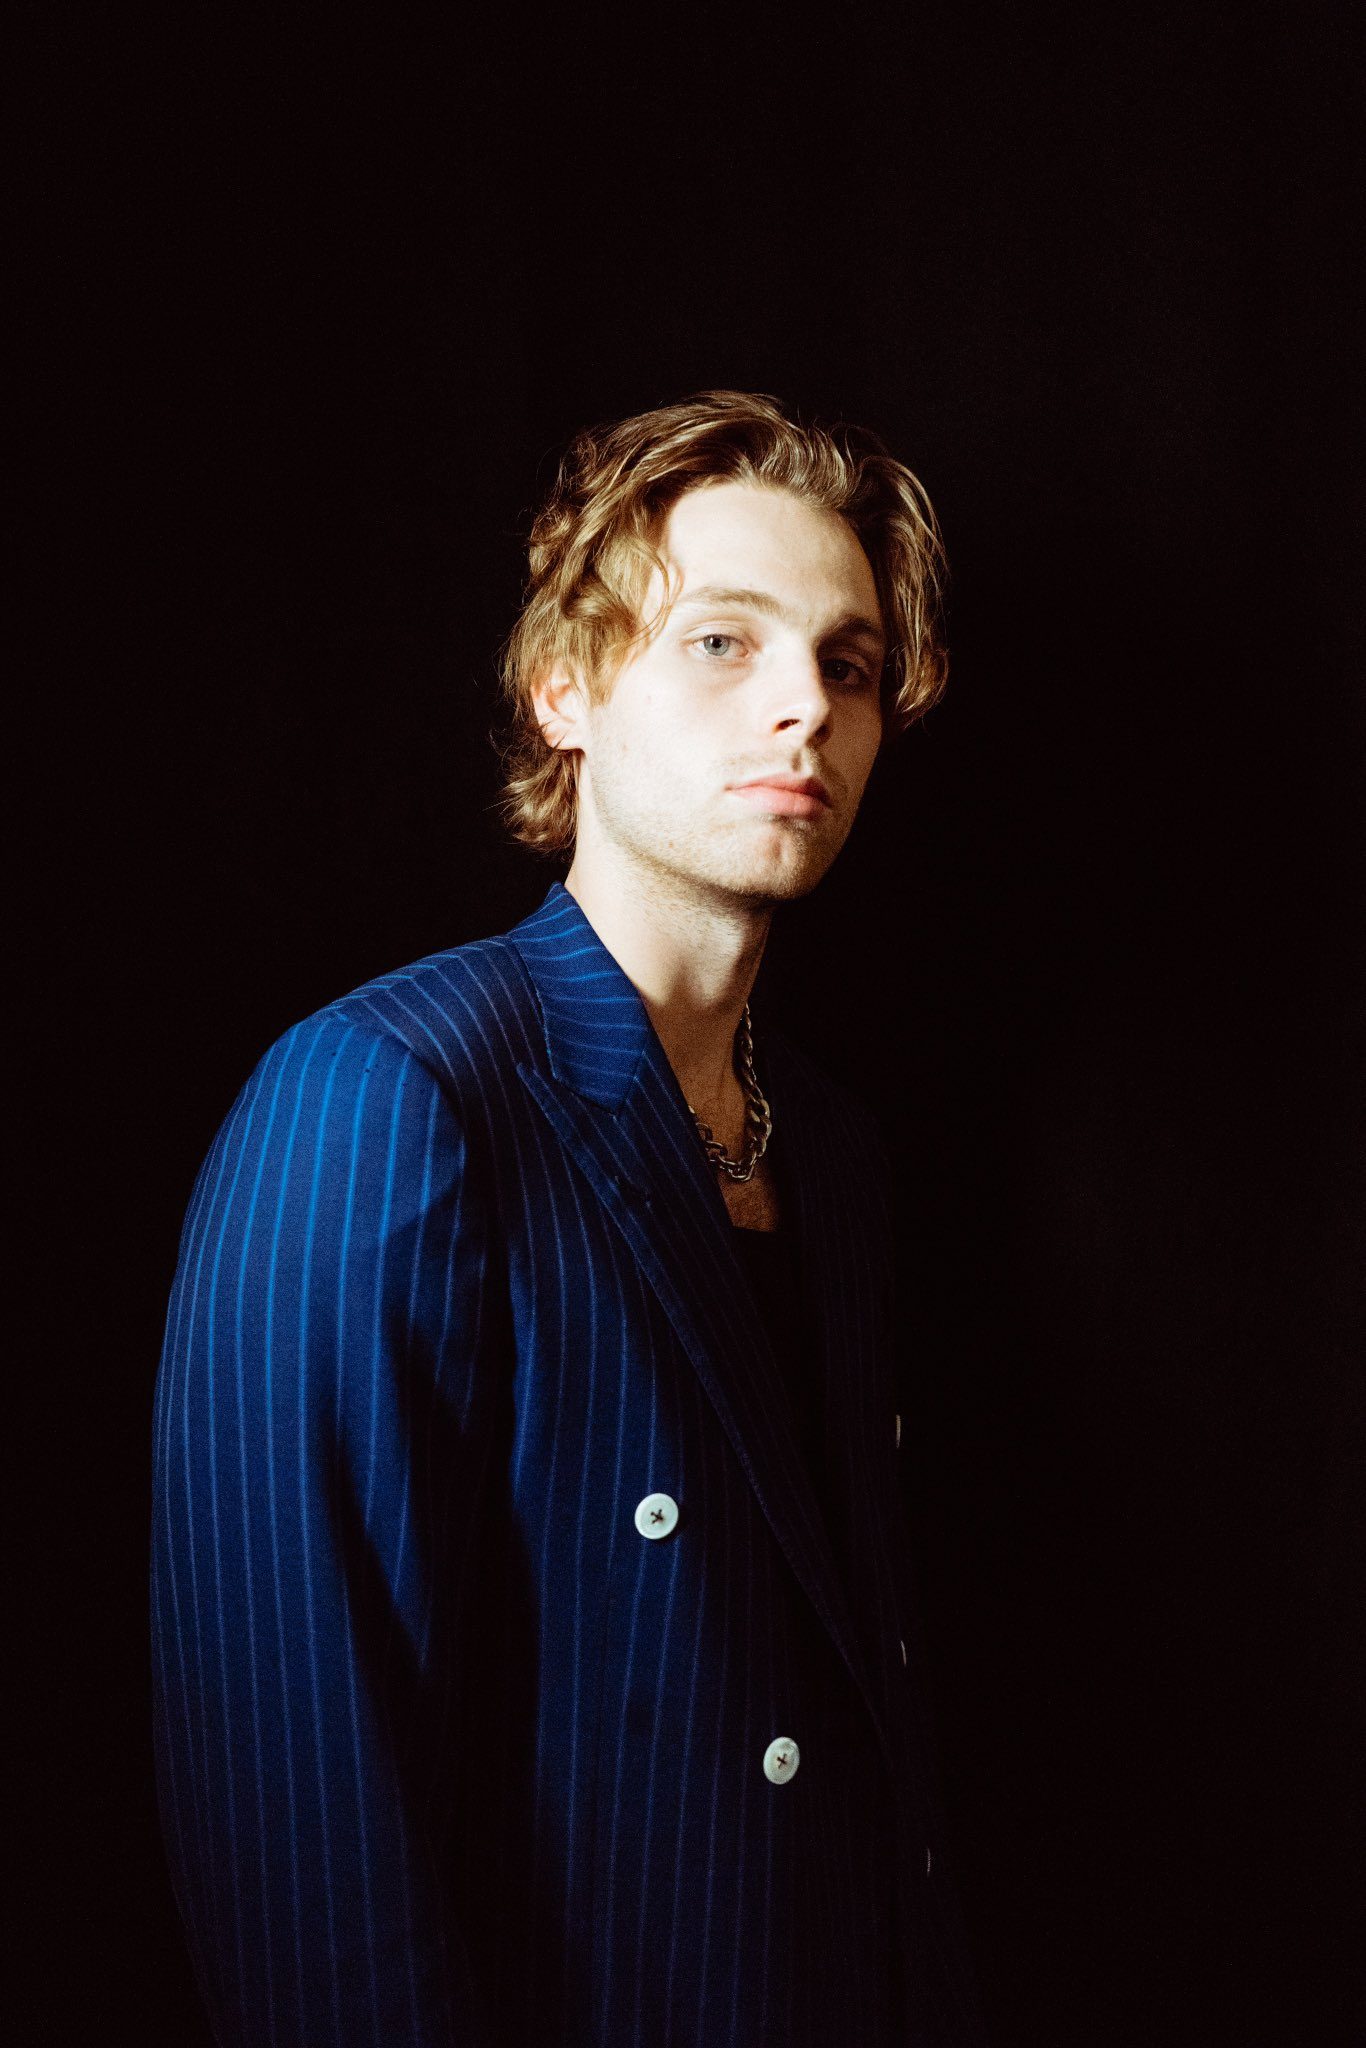 5SOS’ Luke Hemmings to release first solo album in August